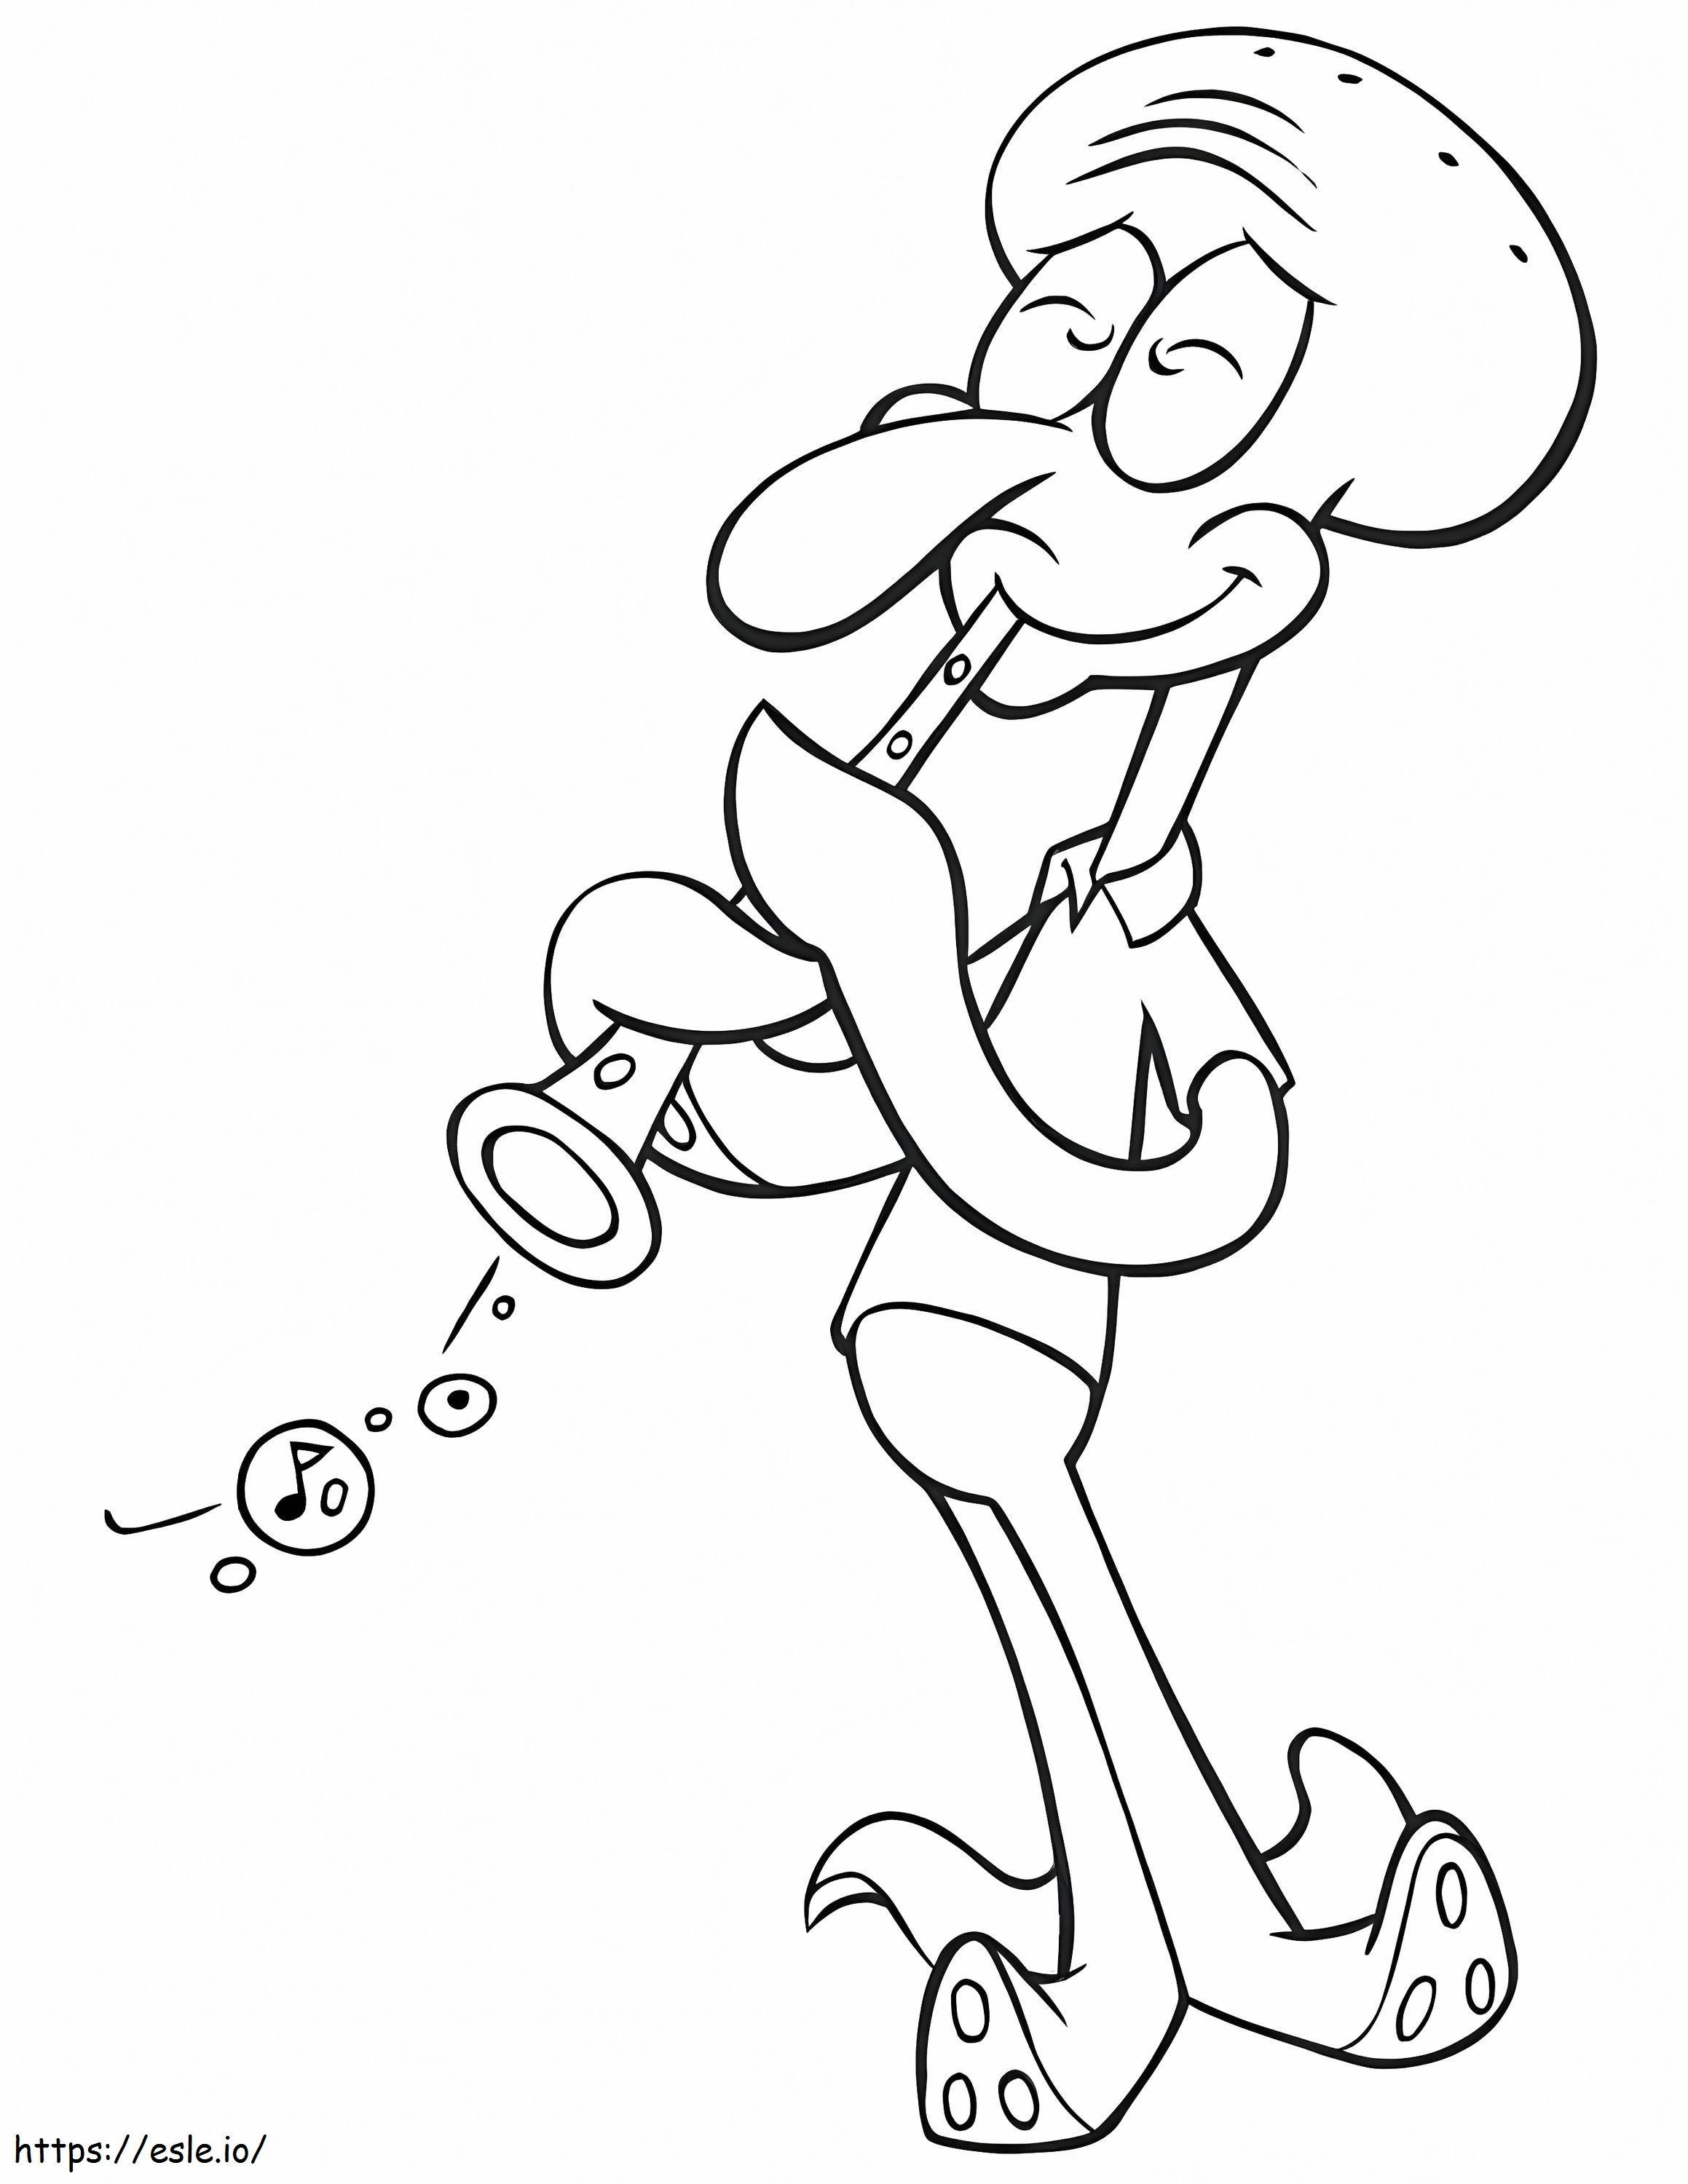 Squidward Tentacle Flute coloring page